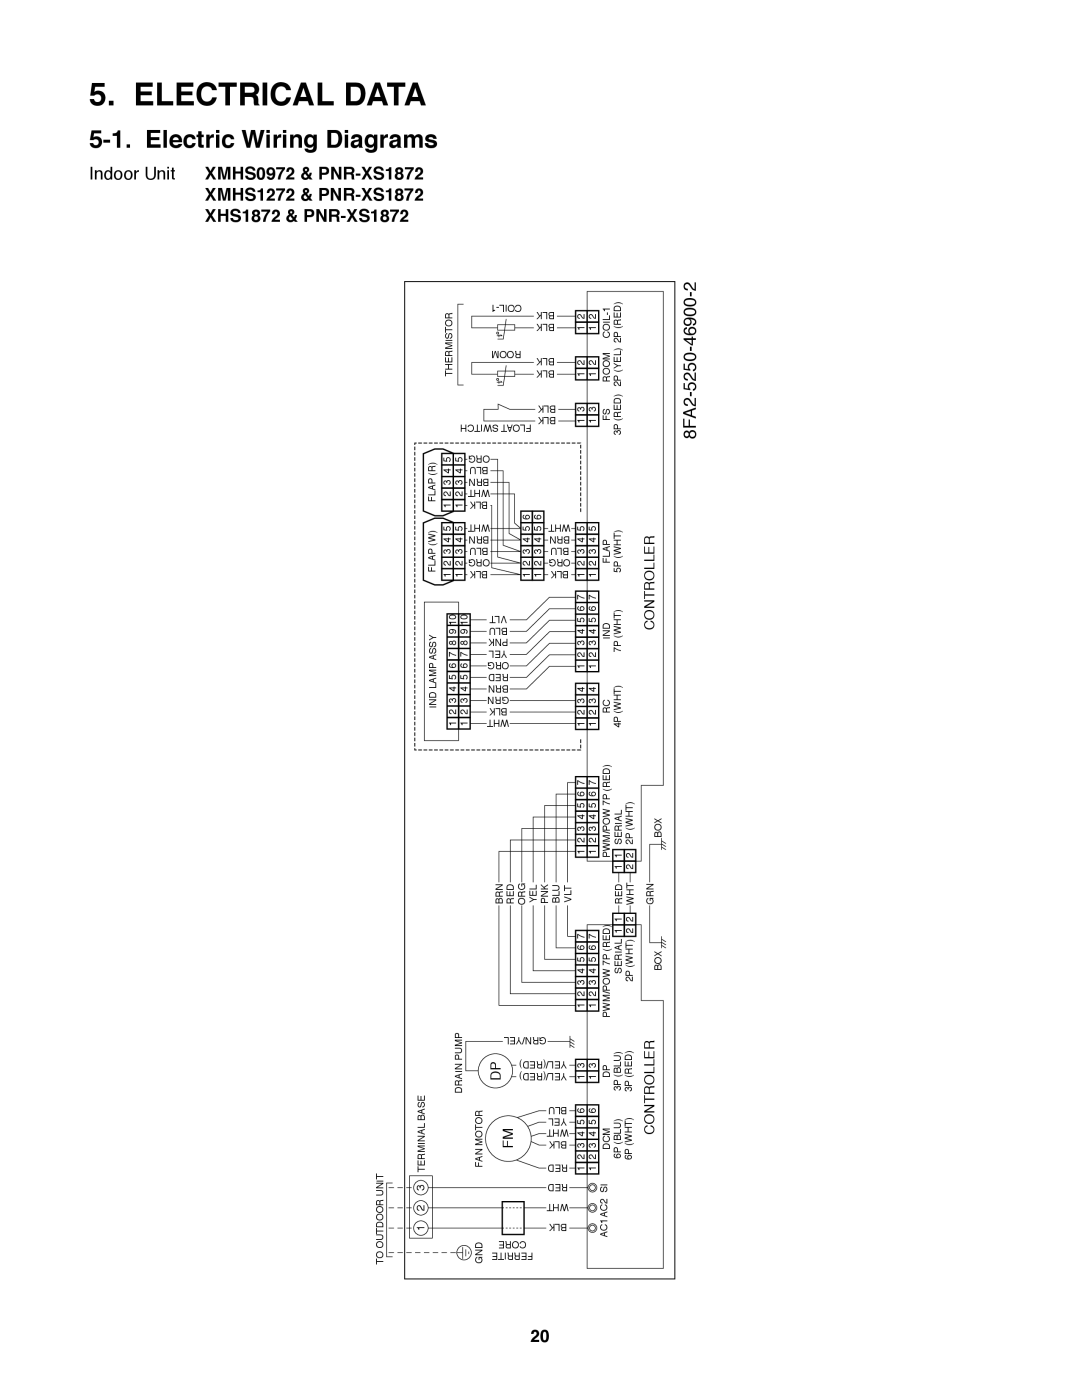 Sanyo XMHS1272 service manual Electrical Data, Electric Wiring Diagrams, Indoor Unit XMHS0972 & PNR-XS1872, Controller 